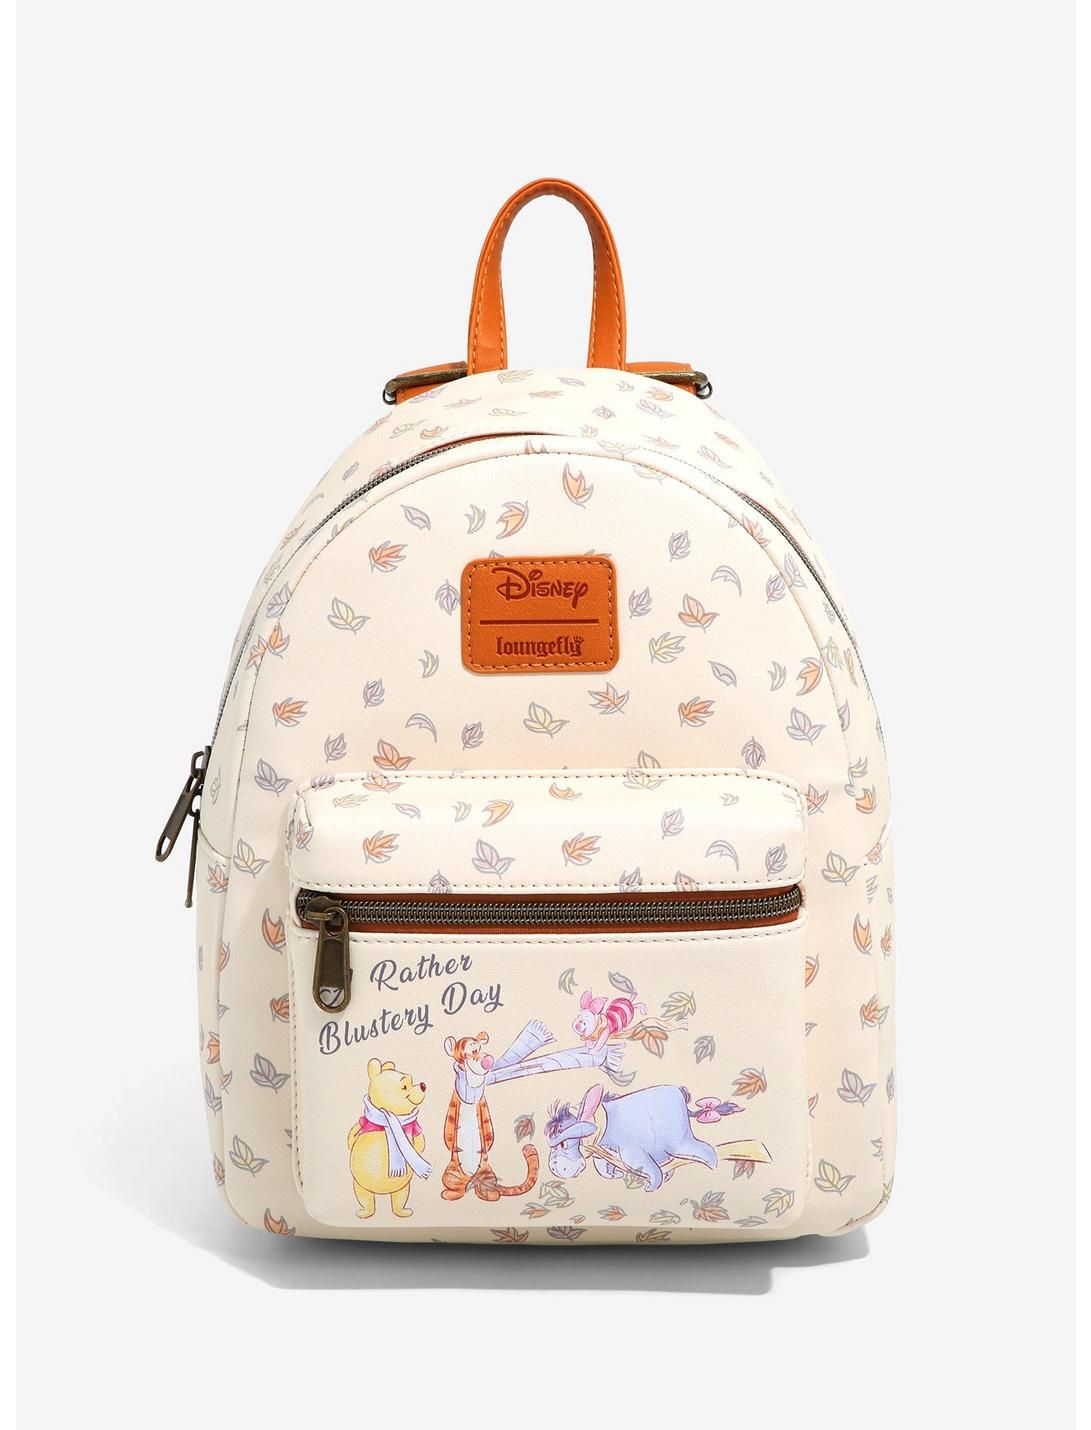 Loungefly Disney Winnie The Pooh Blustery Day Mini Backpack | Hot Topic